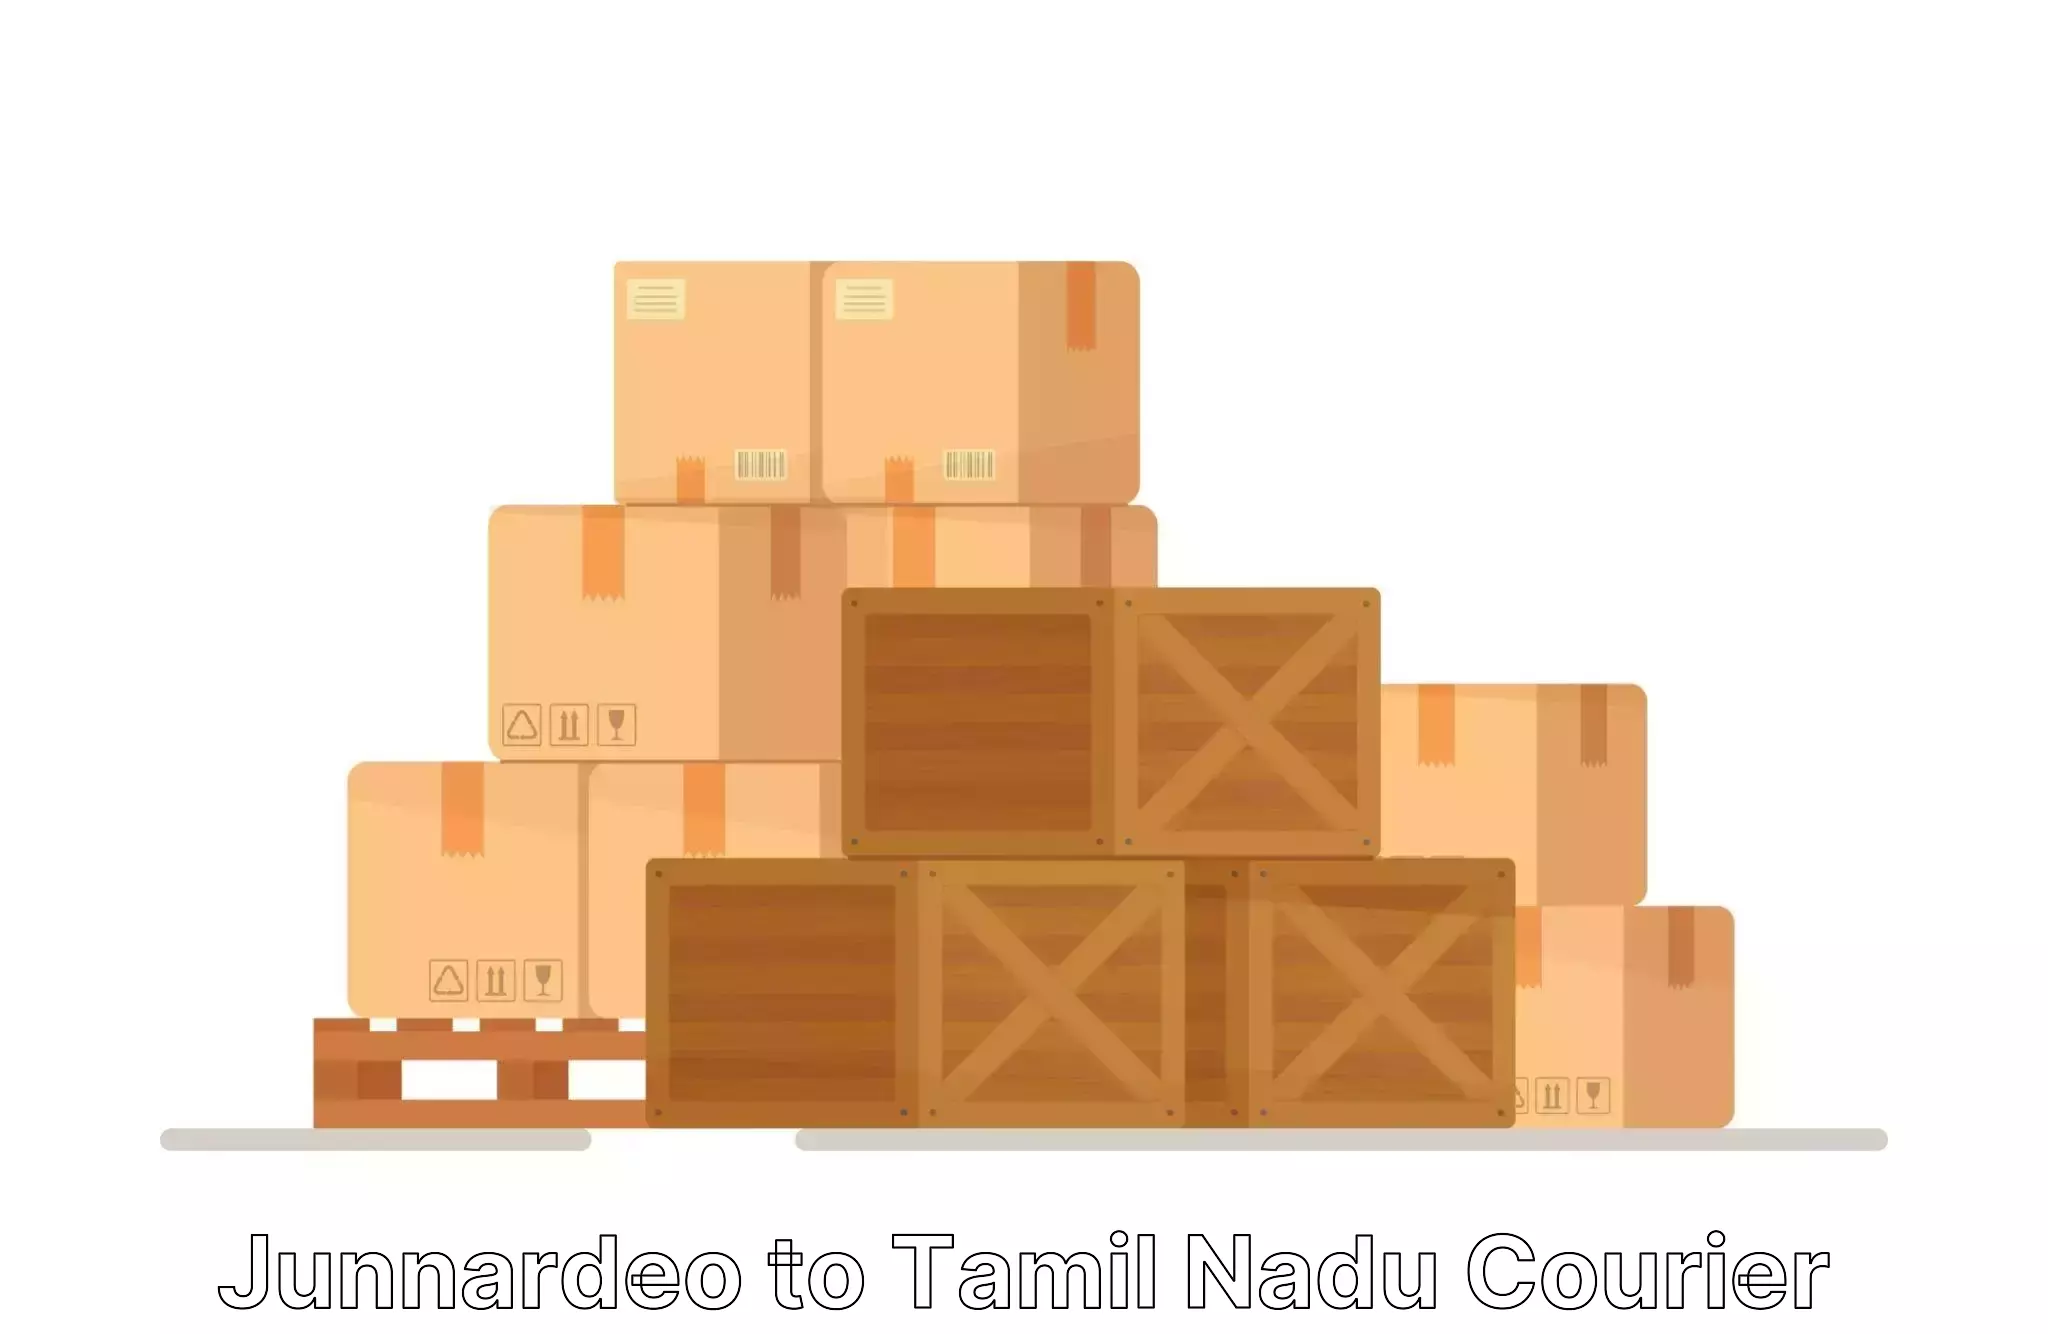 Expert household relocation in Junnardeo to Tamil Nadu